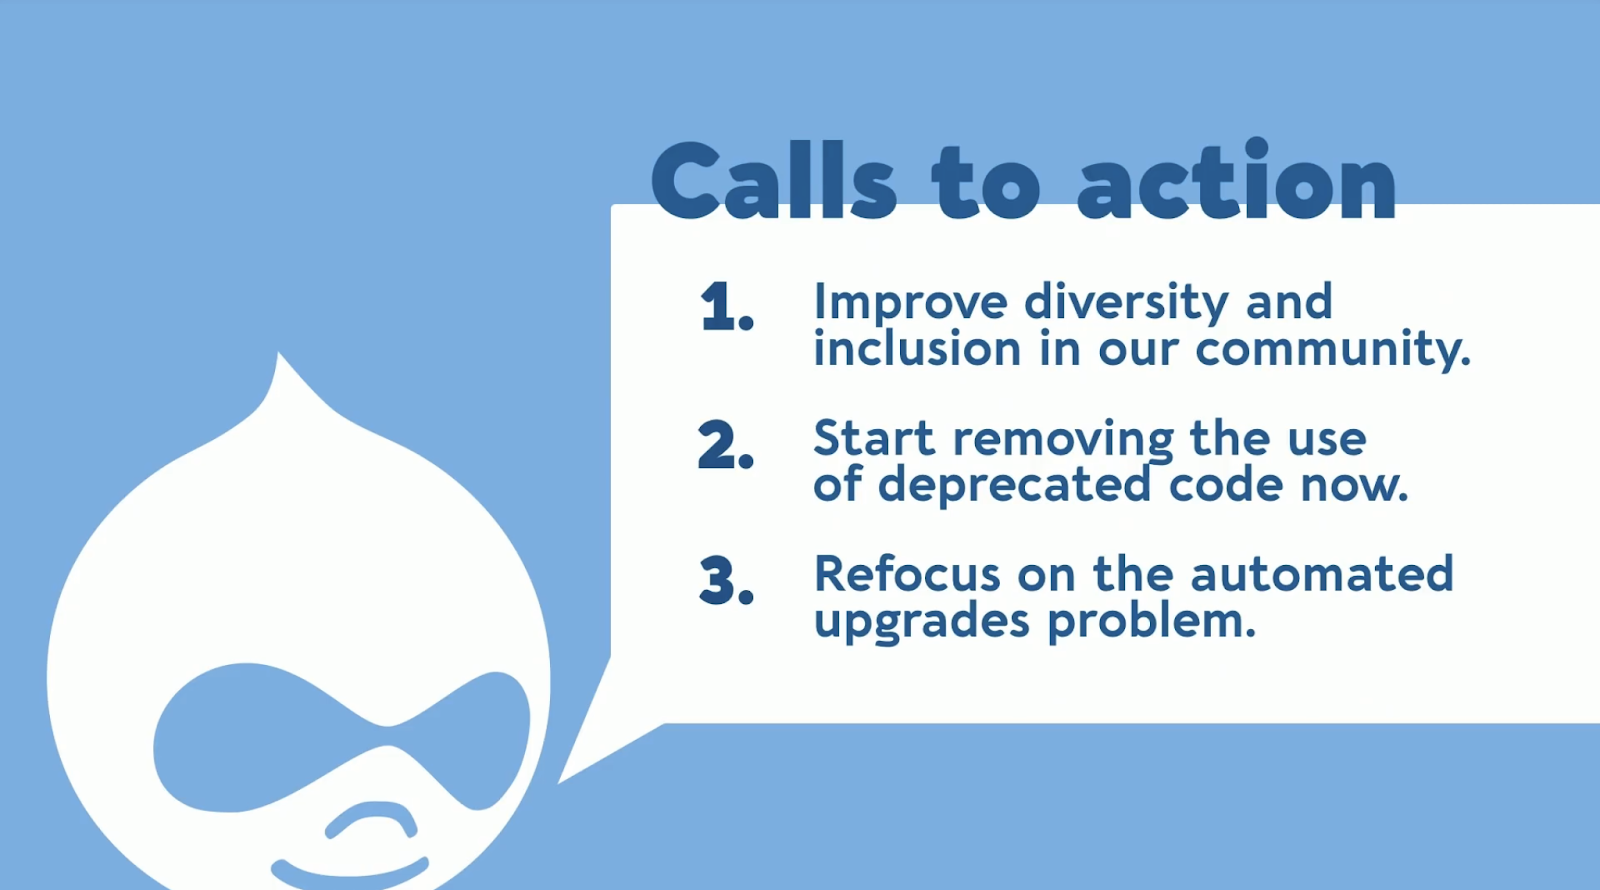 "Calls to action: 1. Improve diversity and inclusion in our community. 2. Start removing the use of deprecated code now. 3. Refocus on the automated upgrades problem."